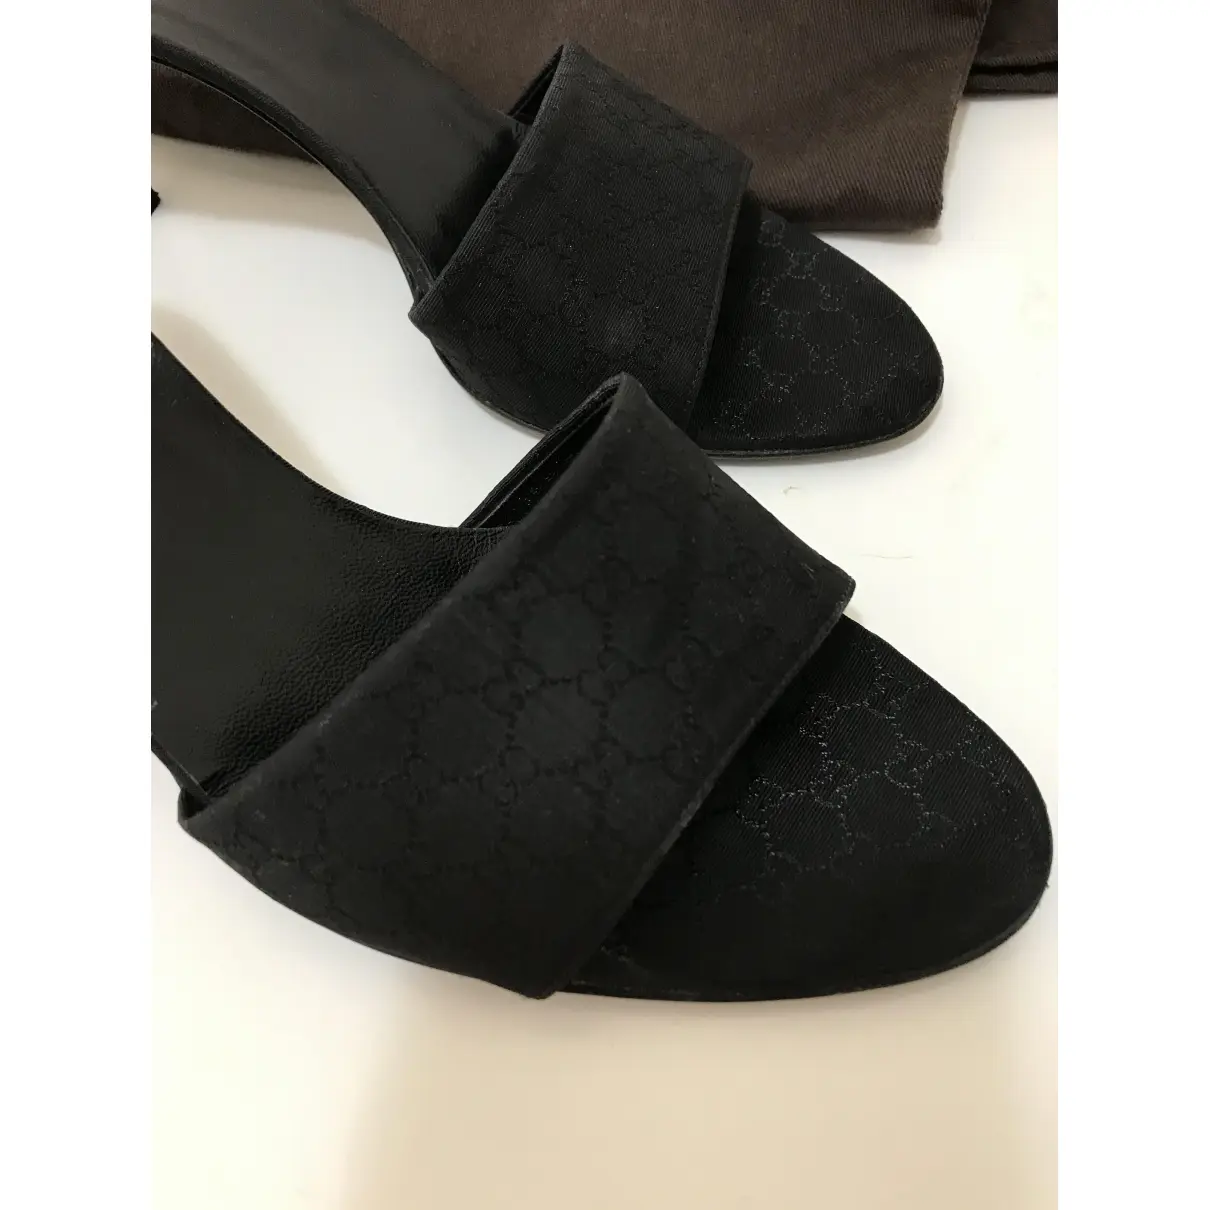 Buy Gucci Double G leather mules online